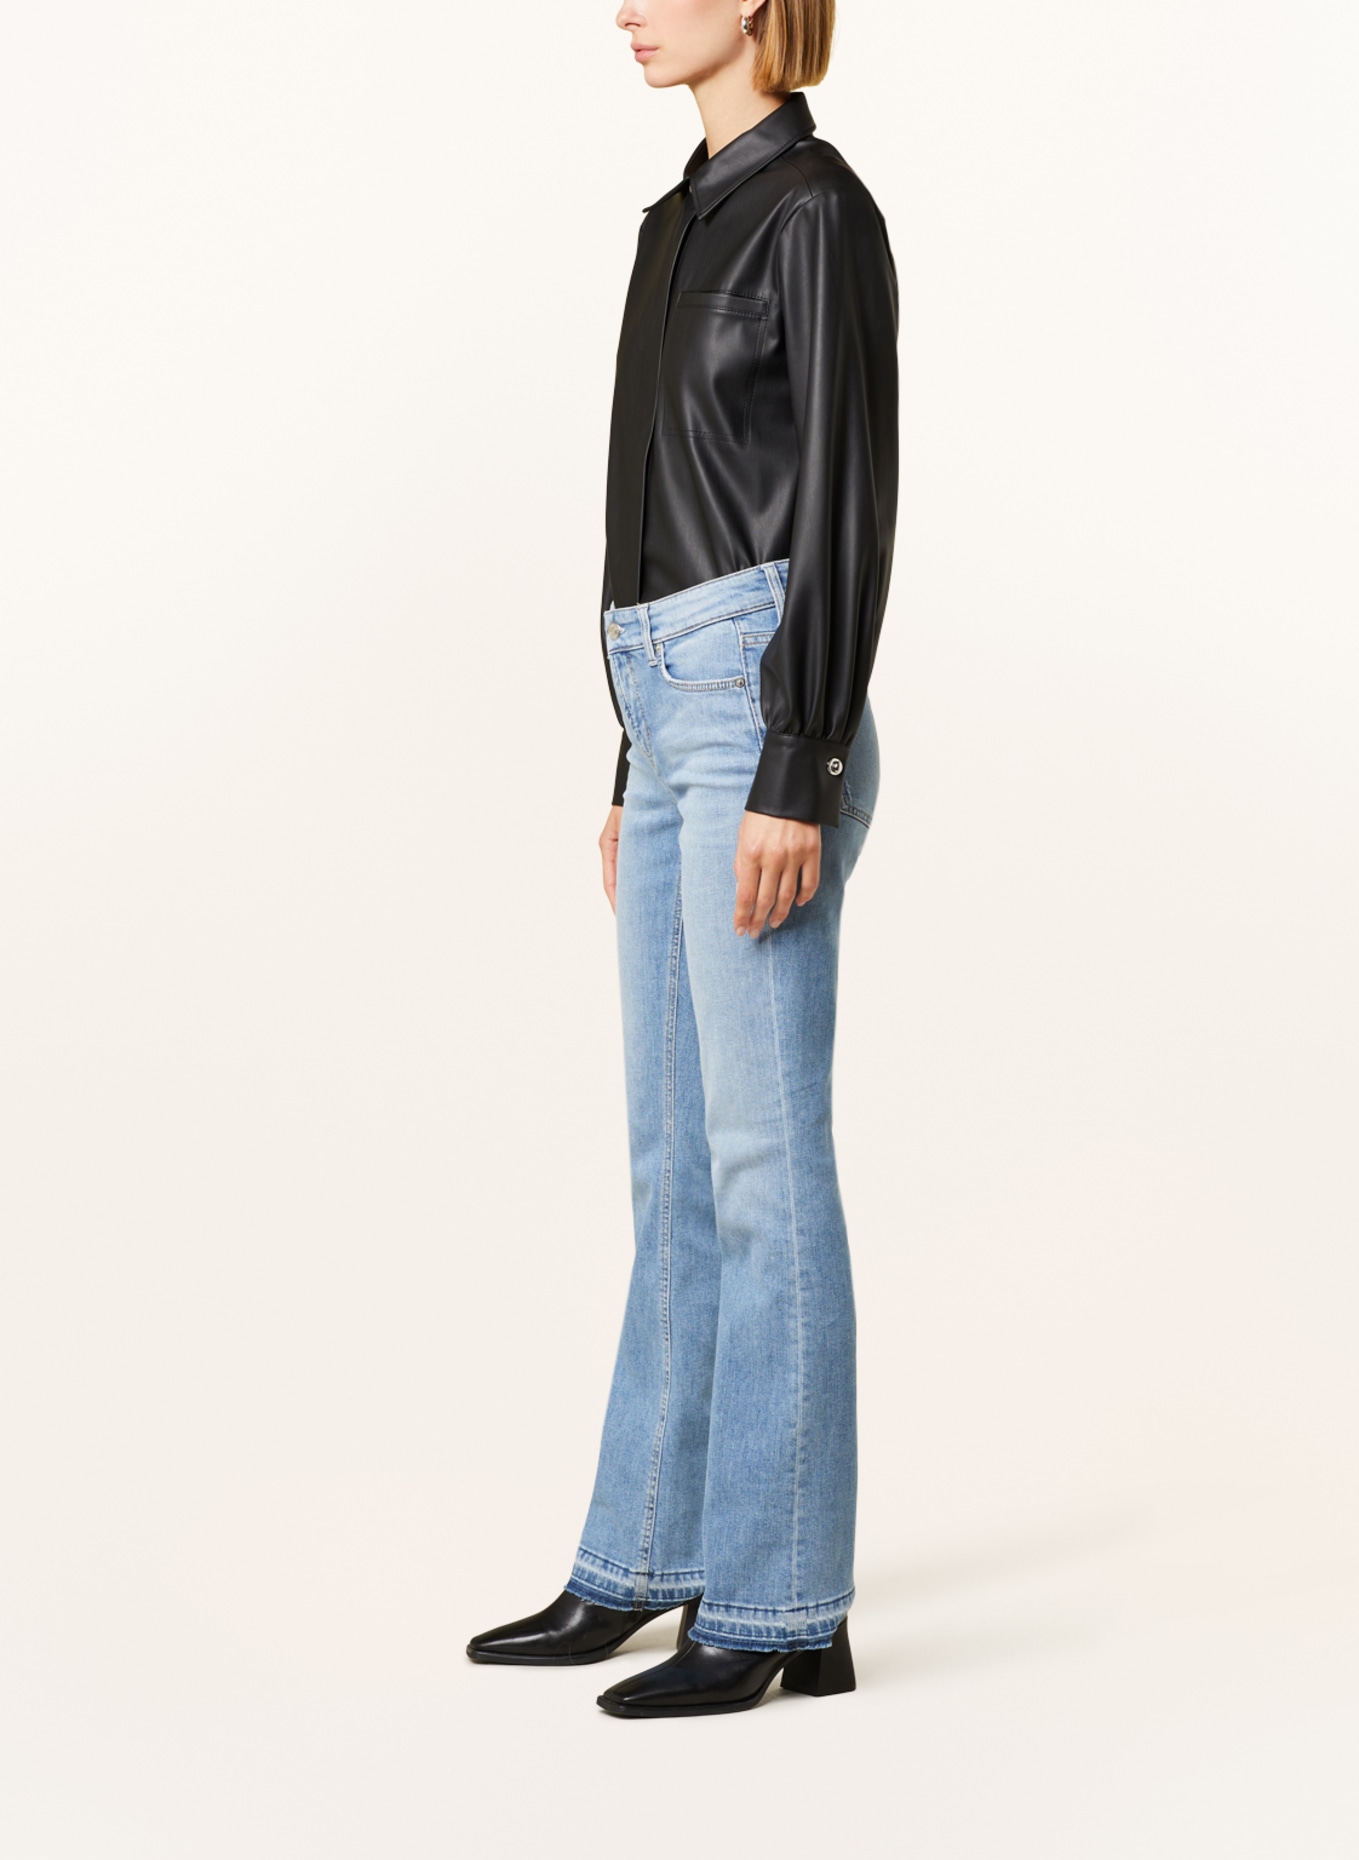 CAMBIO Flared jeans PARIS, Color: 5212 light used open hem (Image 4)